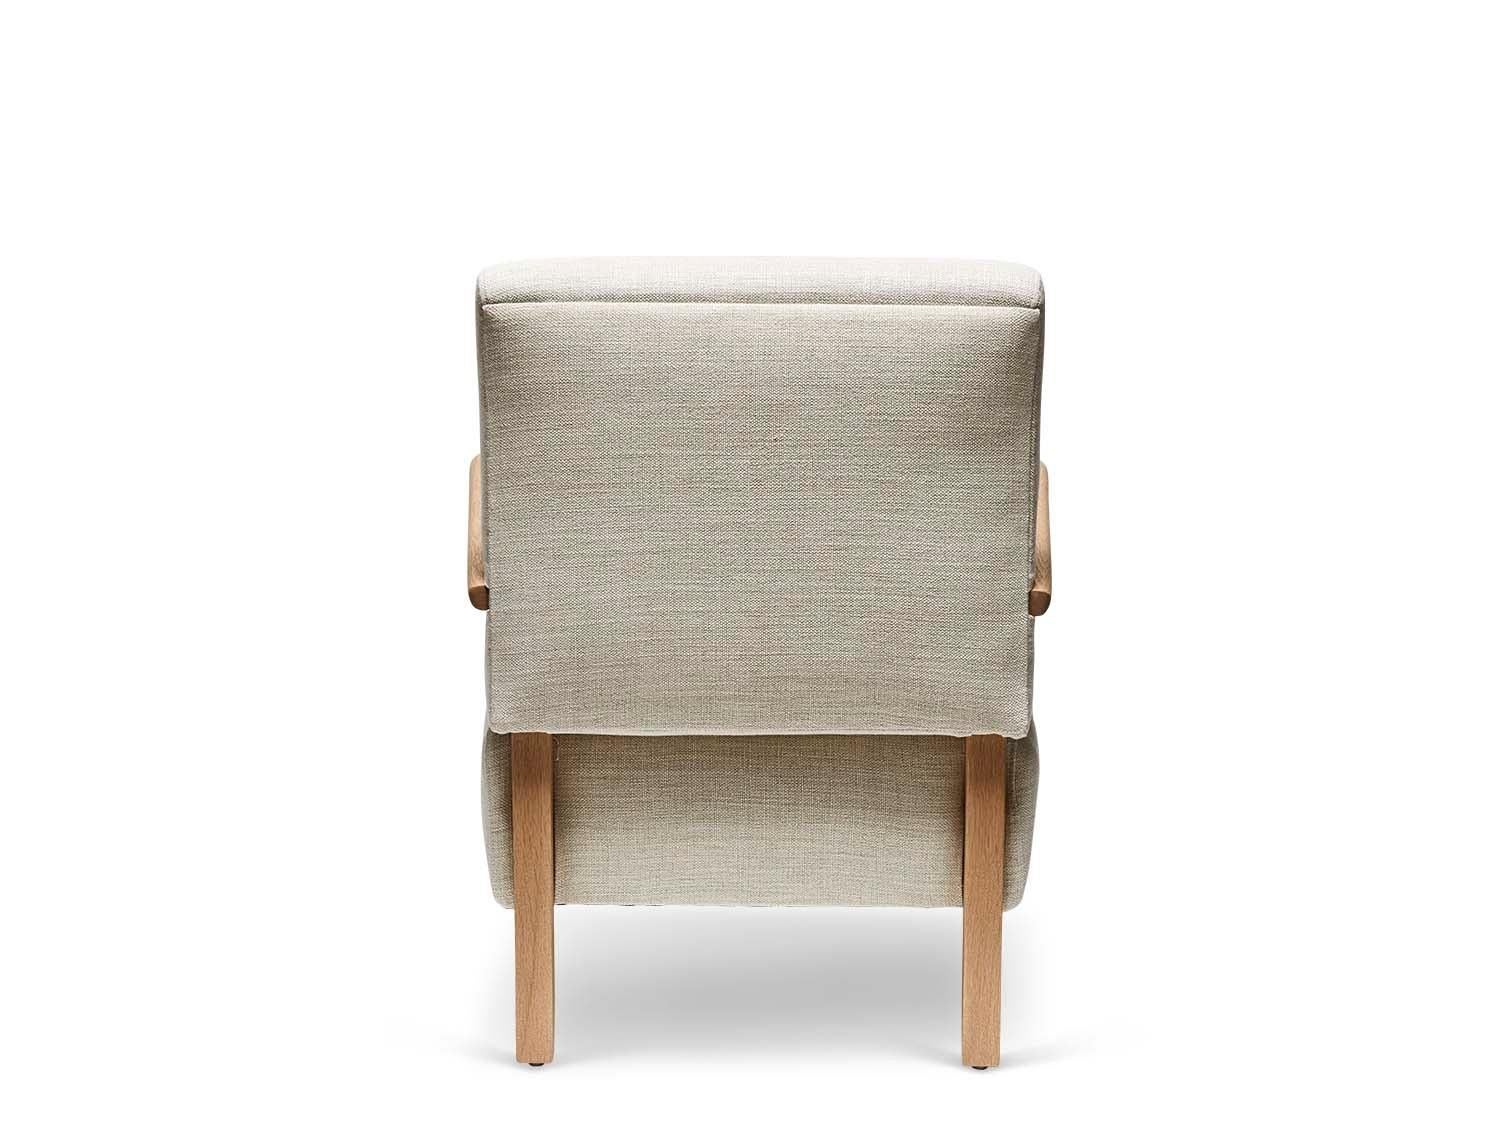 American Oak and Linen Niguel Lounge Chair by Lawson-Fenning